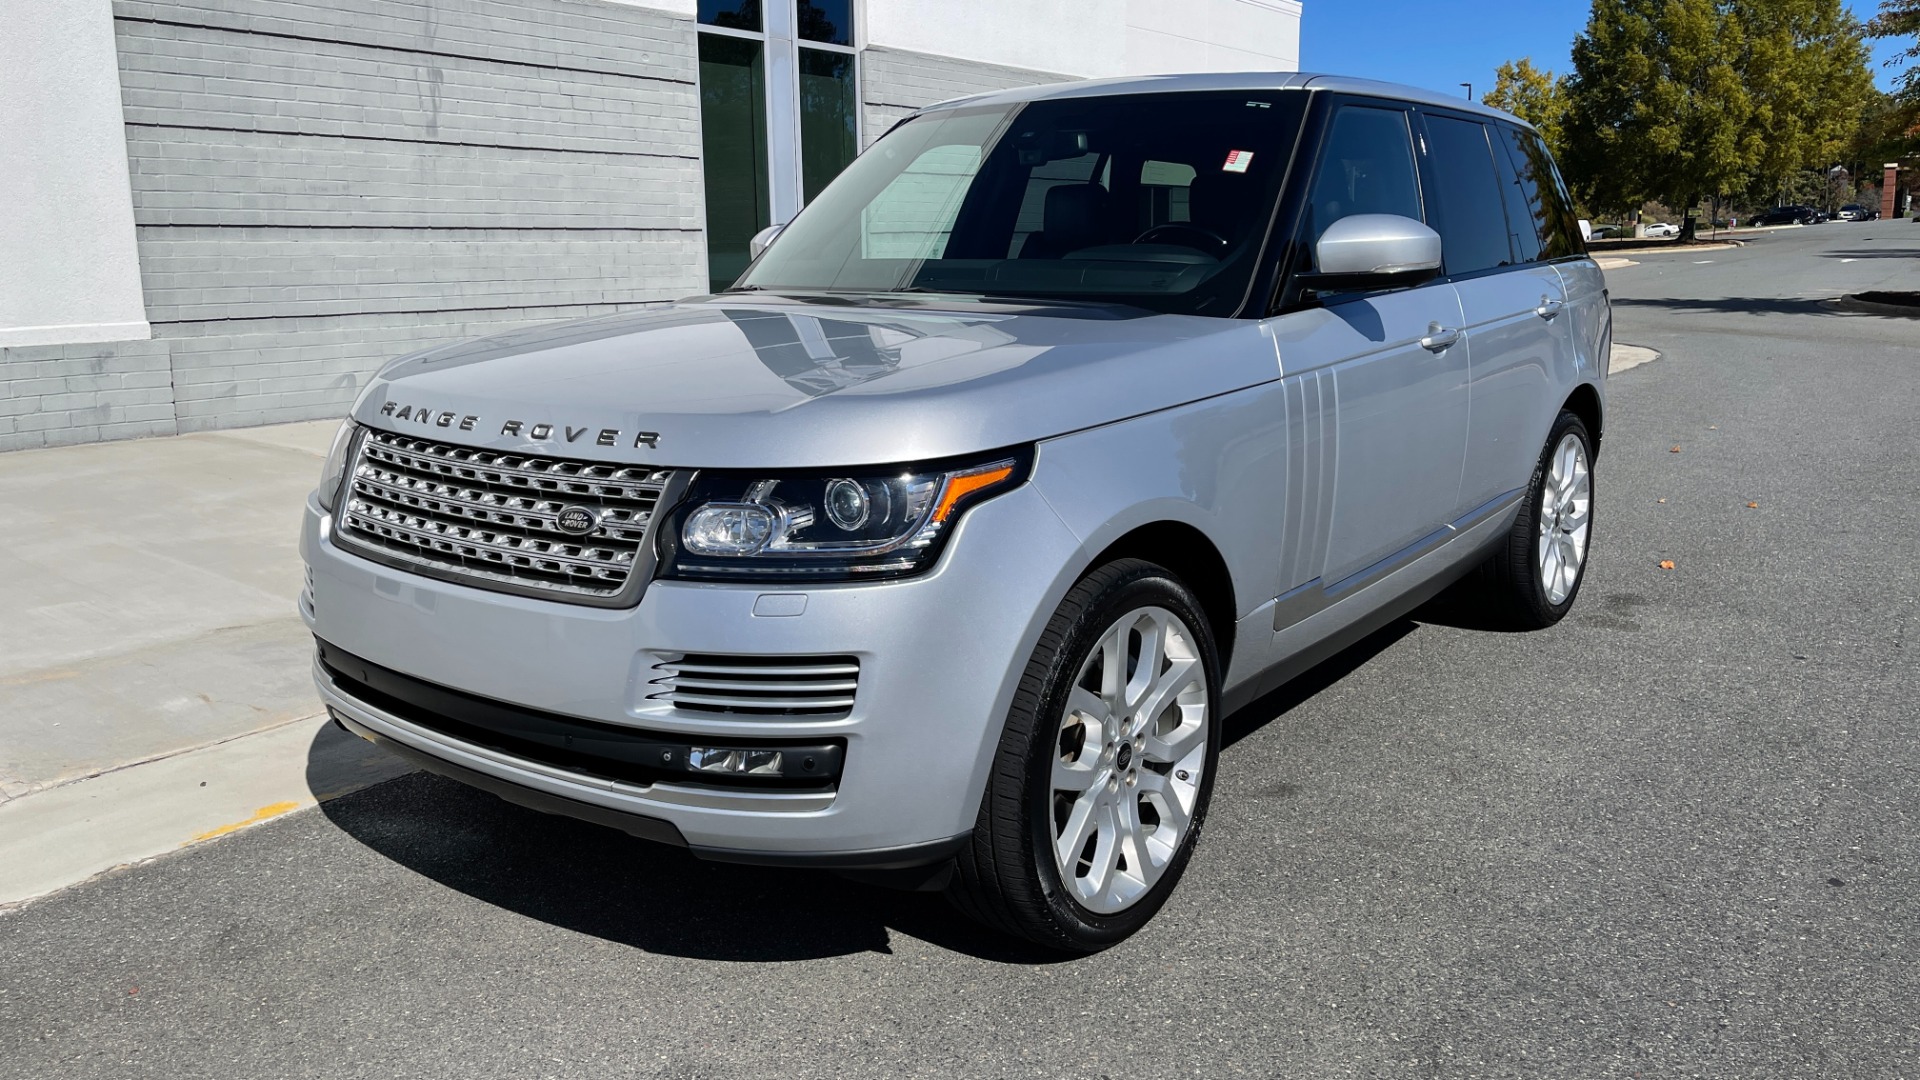 Used 2013 Land Rover Range Rover HSE / 22IN WHEELS / CLIMATE PACKAGE / SOFT CLOSE / VISION ASSIST for sale Sold at Formula Imports in Charlotte NC 28227 5